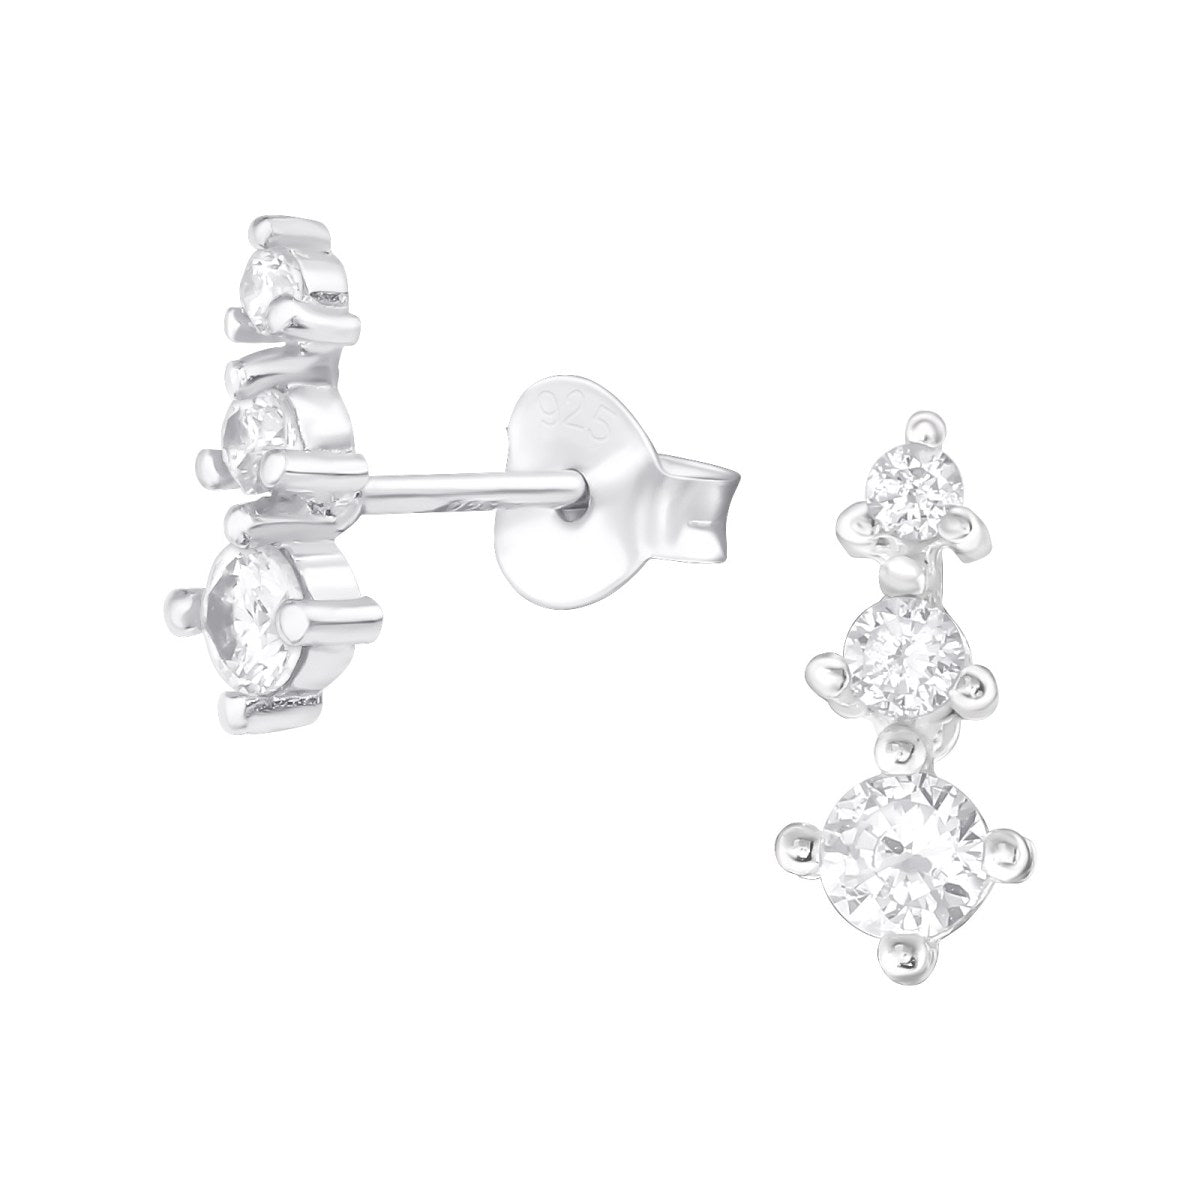 Silver Sparkling Stud Earrings with Cubic Zirconia